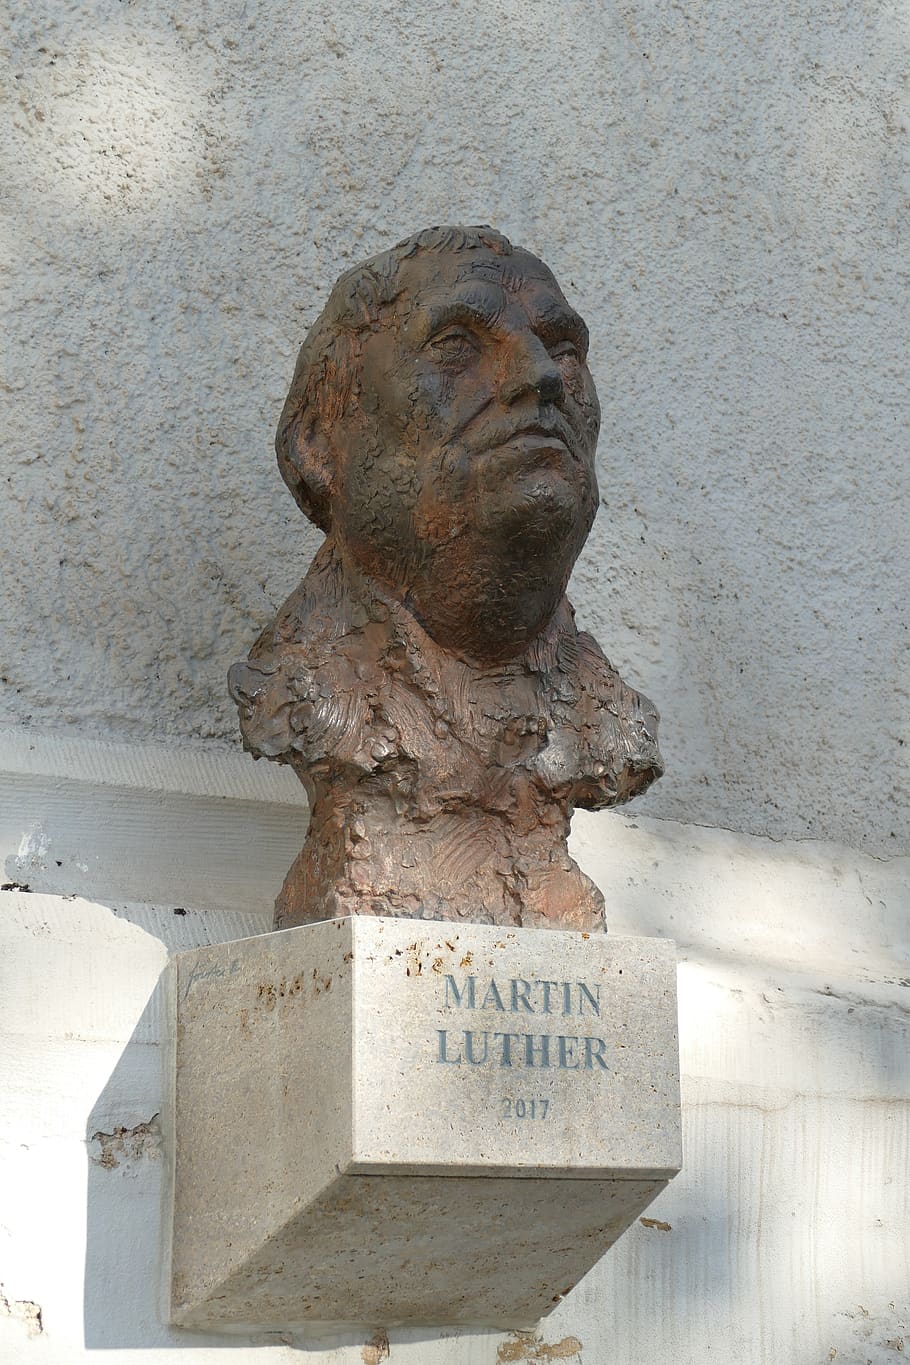 weimar, thuringia germany, unesco, world heritage site, unesco world heritage, historically, monument, luther, bust, sculpture